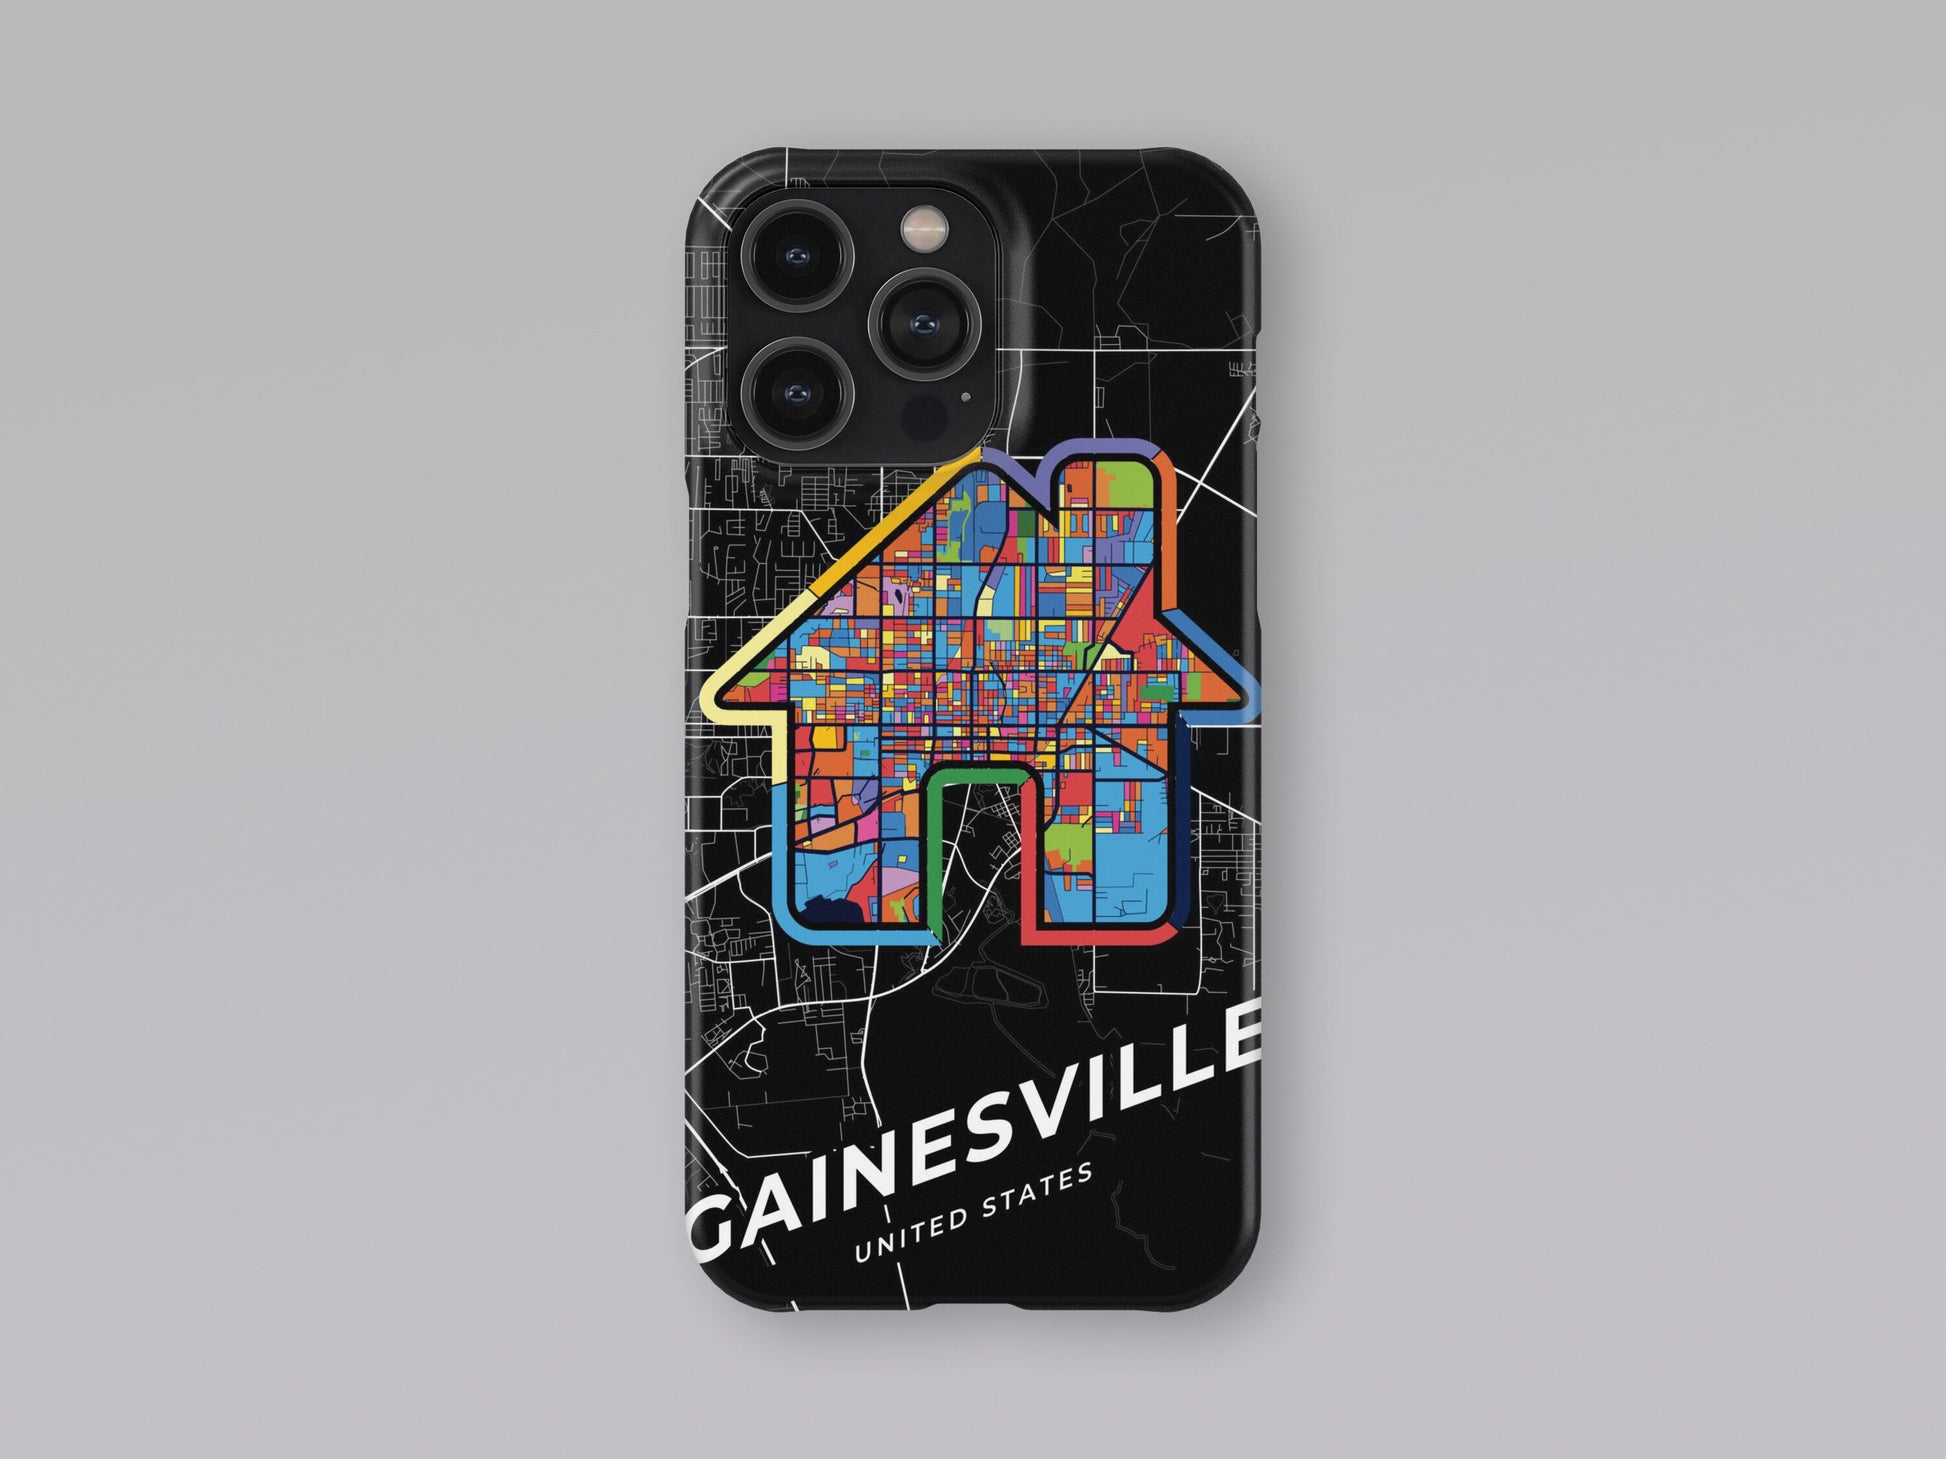 Gainesville Florida slim phone case with colorful icon. Birthday, wedding or housewarming gift. Couple match cases. 3